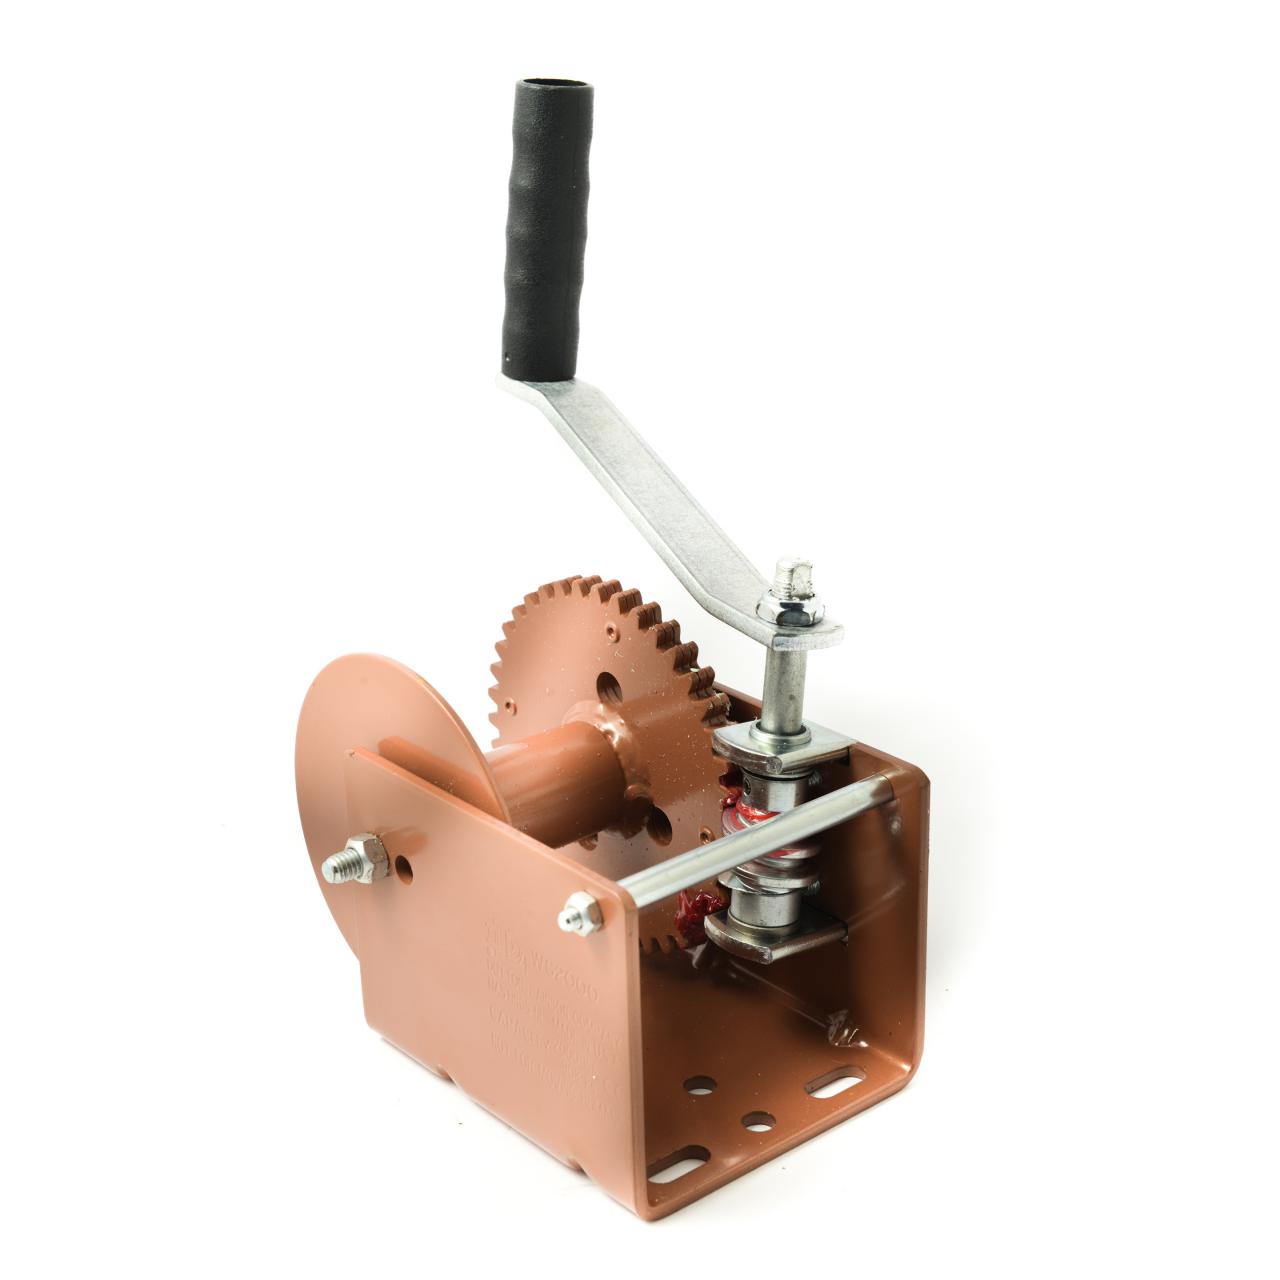 Dutton Lainson worm gear winch 1500 lbs. From